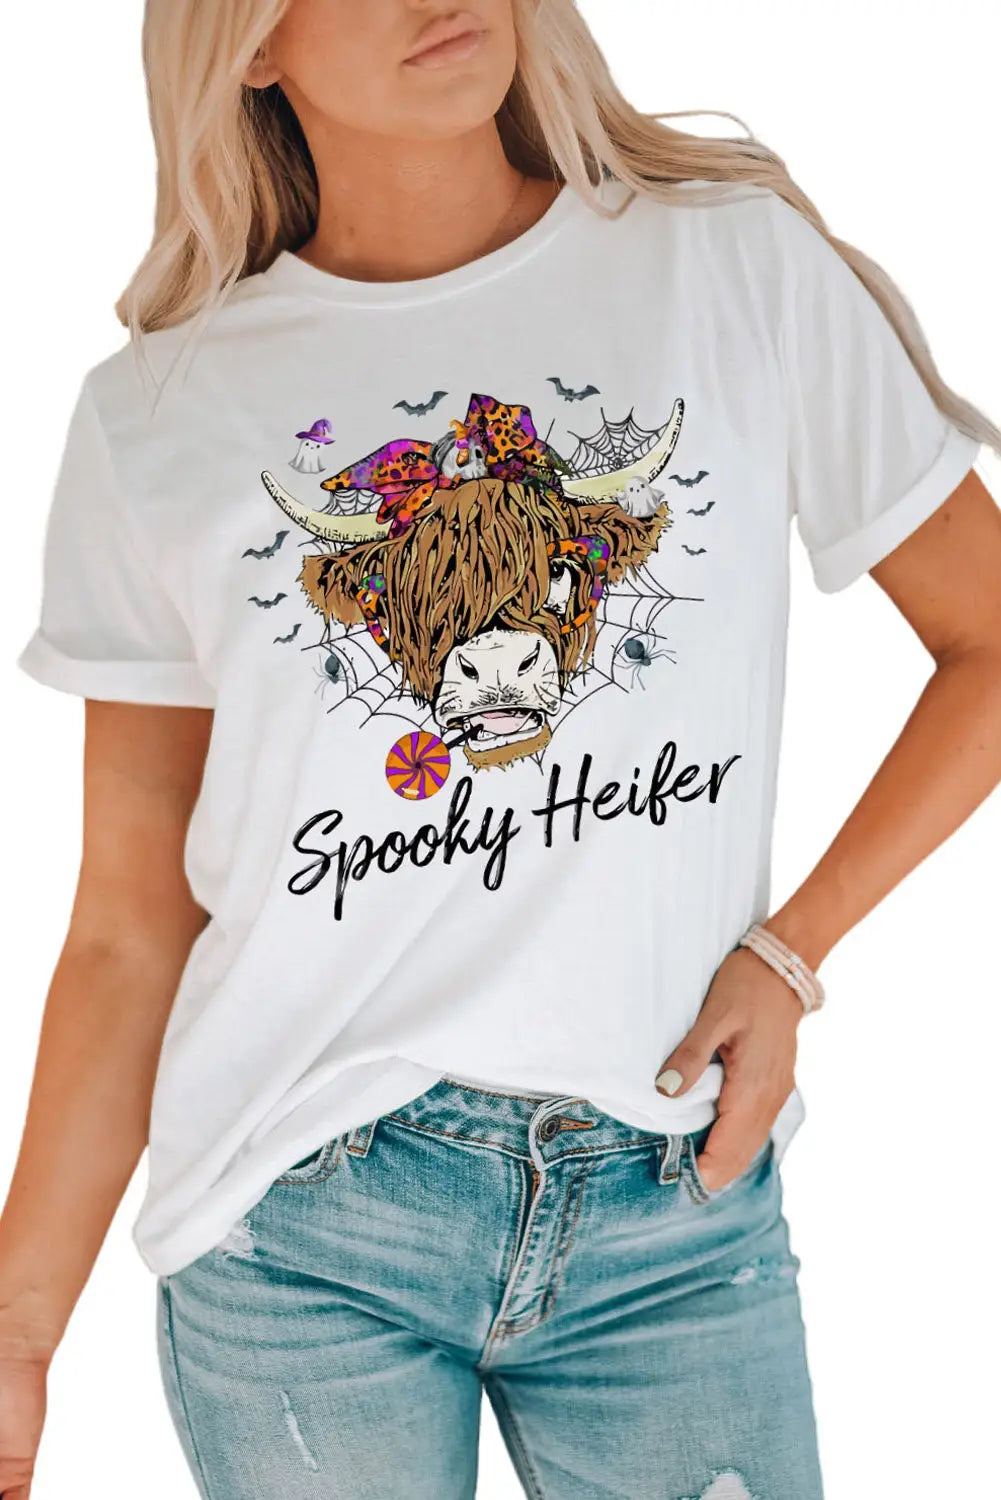 White flannels hayrides pumpkins sweaters bonfires graphic tee